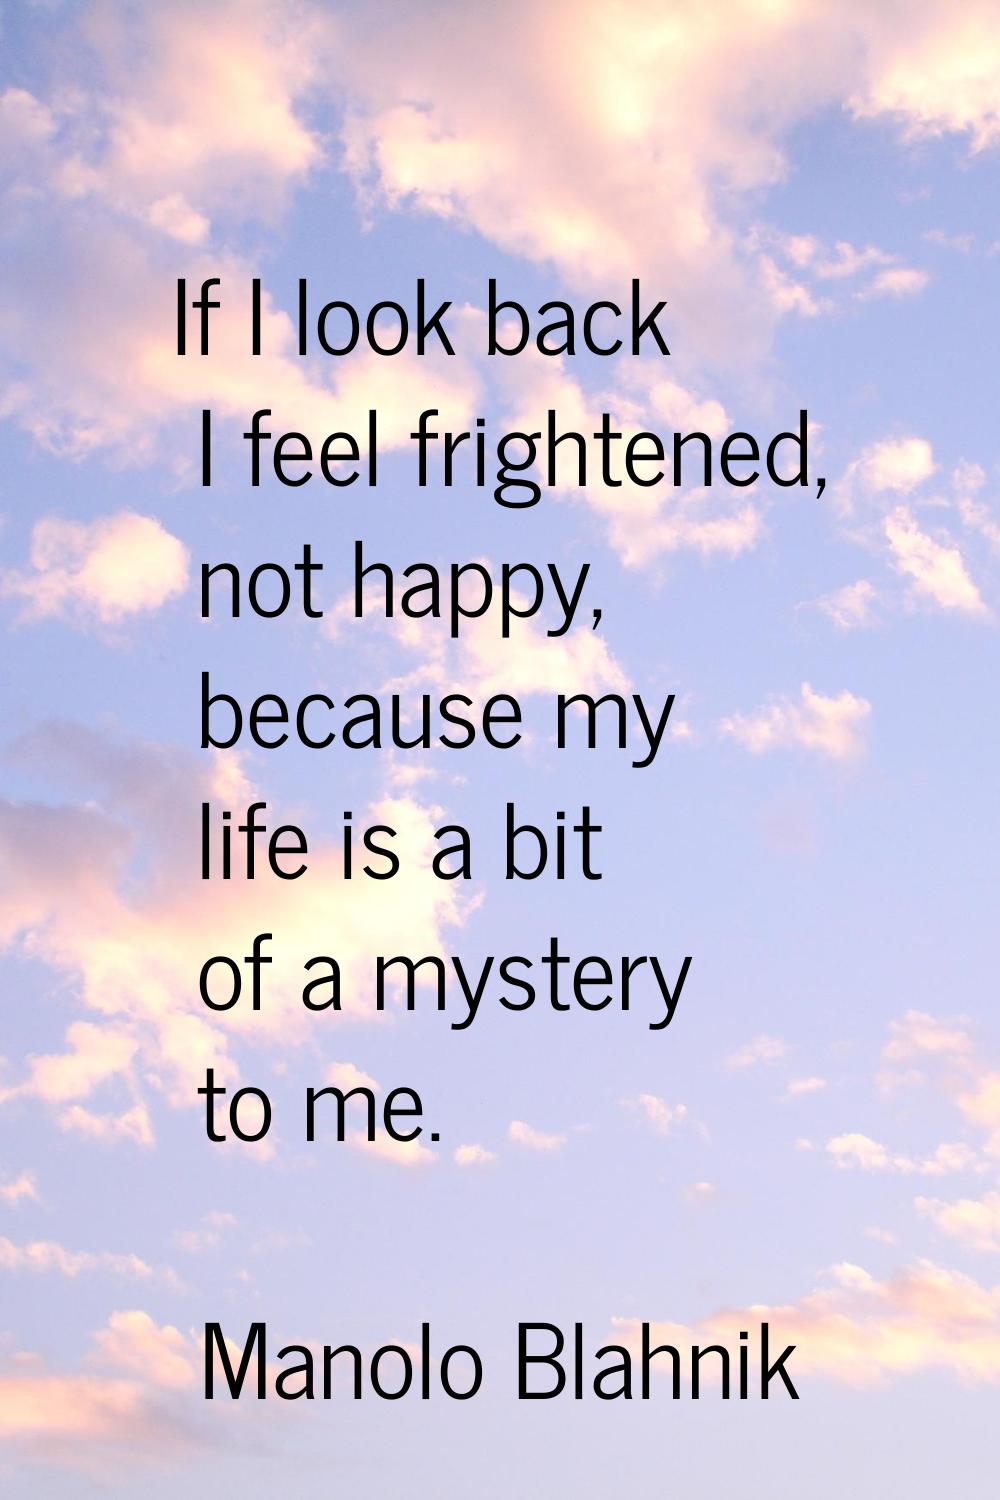 If I look back I feel frightened, not happy, because my life is a bit of a mystery to me.